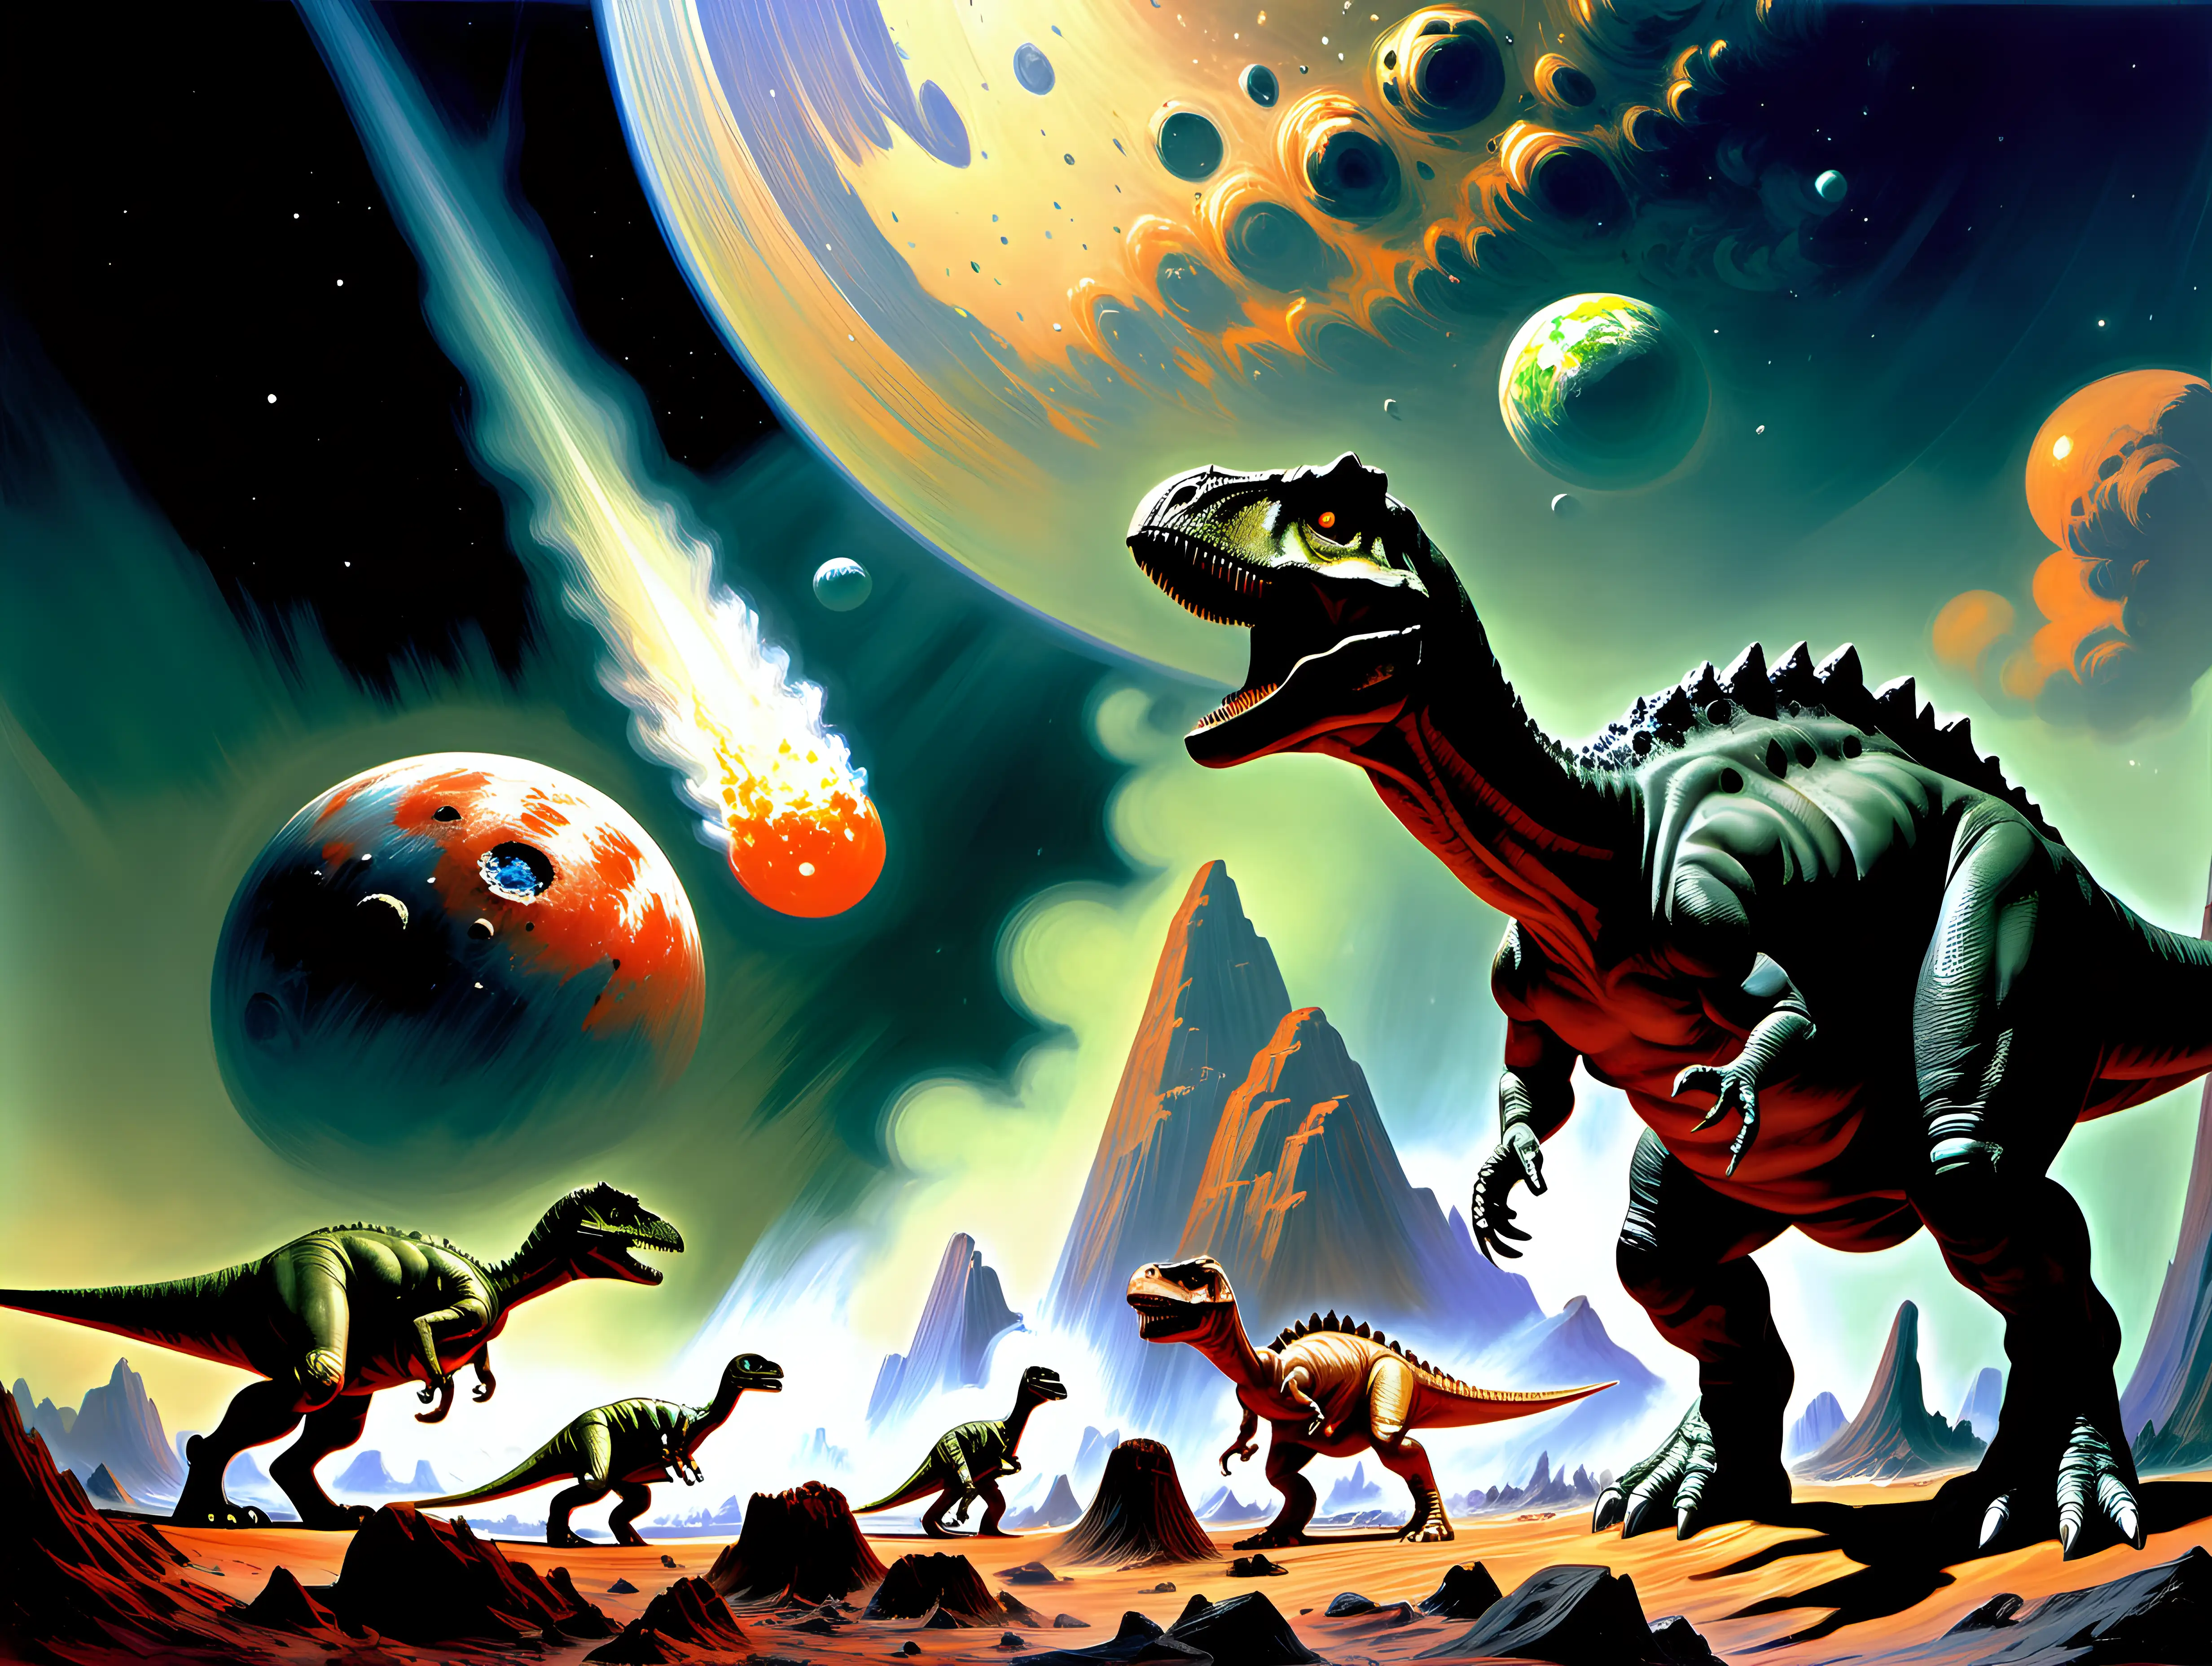 dinosaurs looking at a huge asteroid approaching the Earth 65 million years ago
Frank Frazetta style